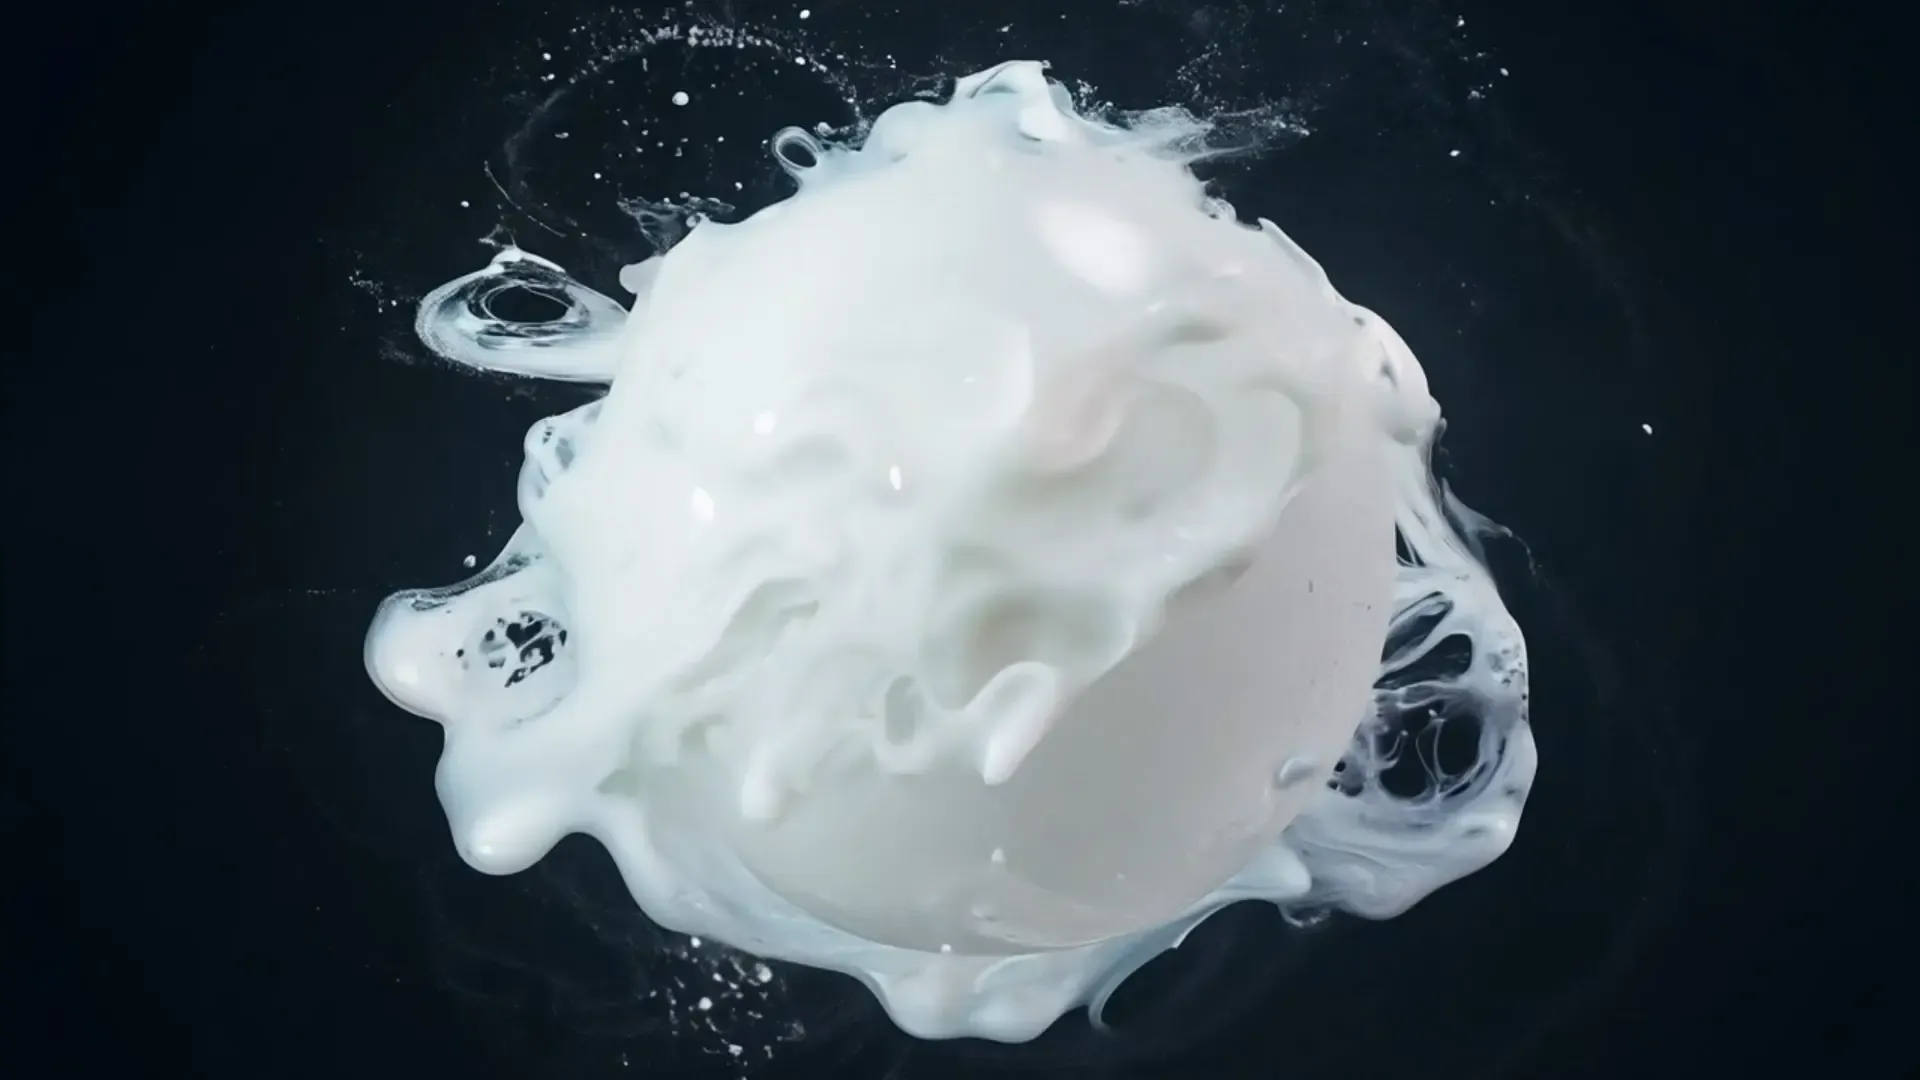 Milky Splash Transition for Fresh and Clean Visual Effects